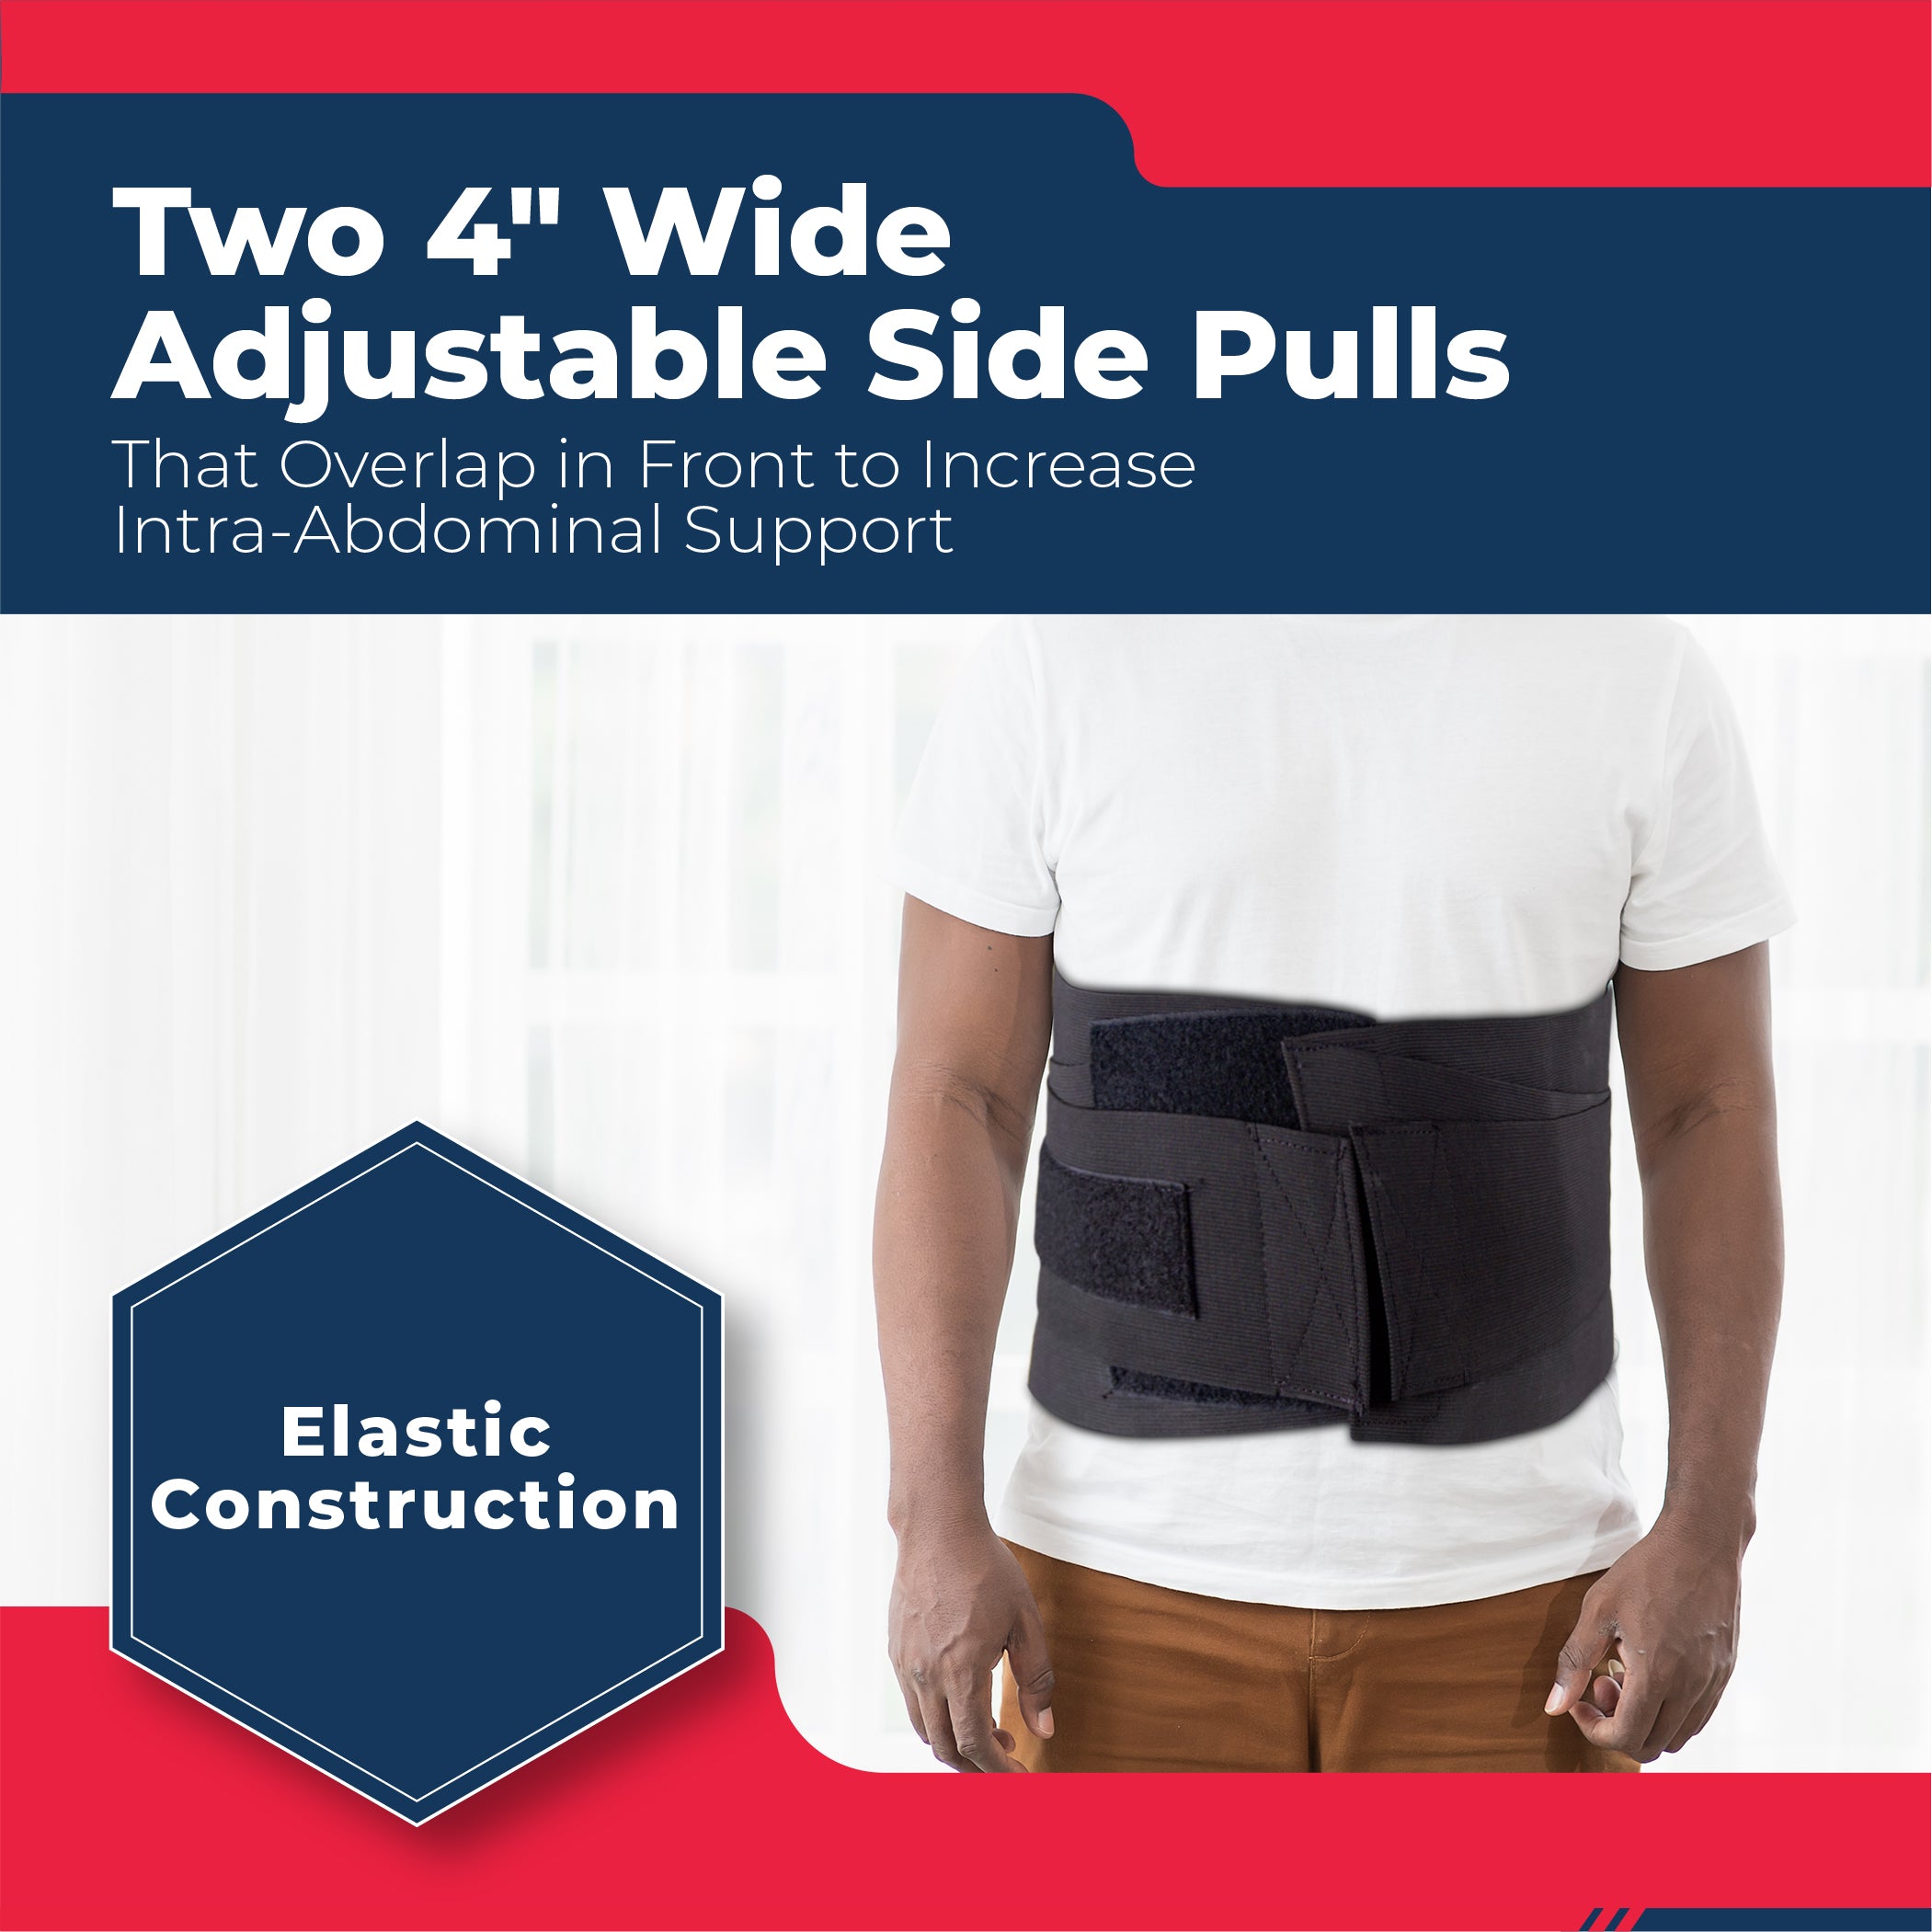 Elastic Lumbar Support with Spandex Pocket (L5N) - X-Small: 22-26